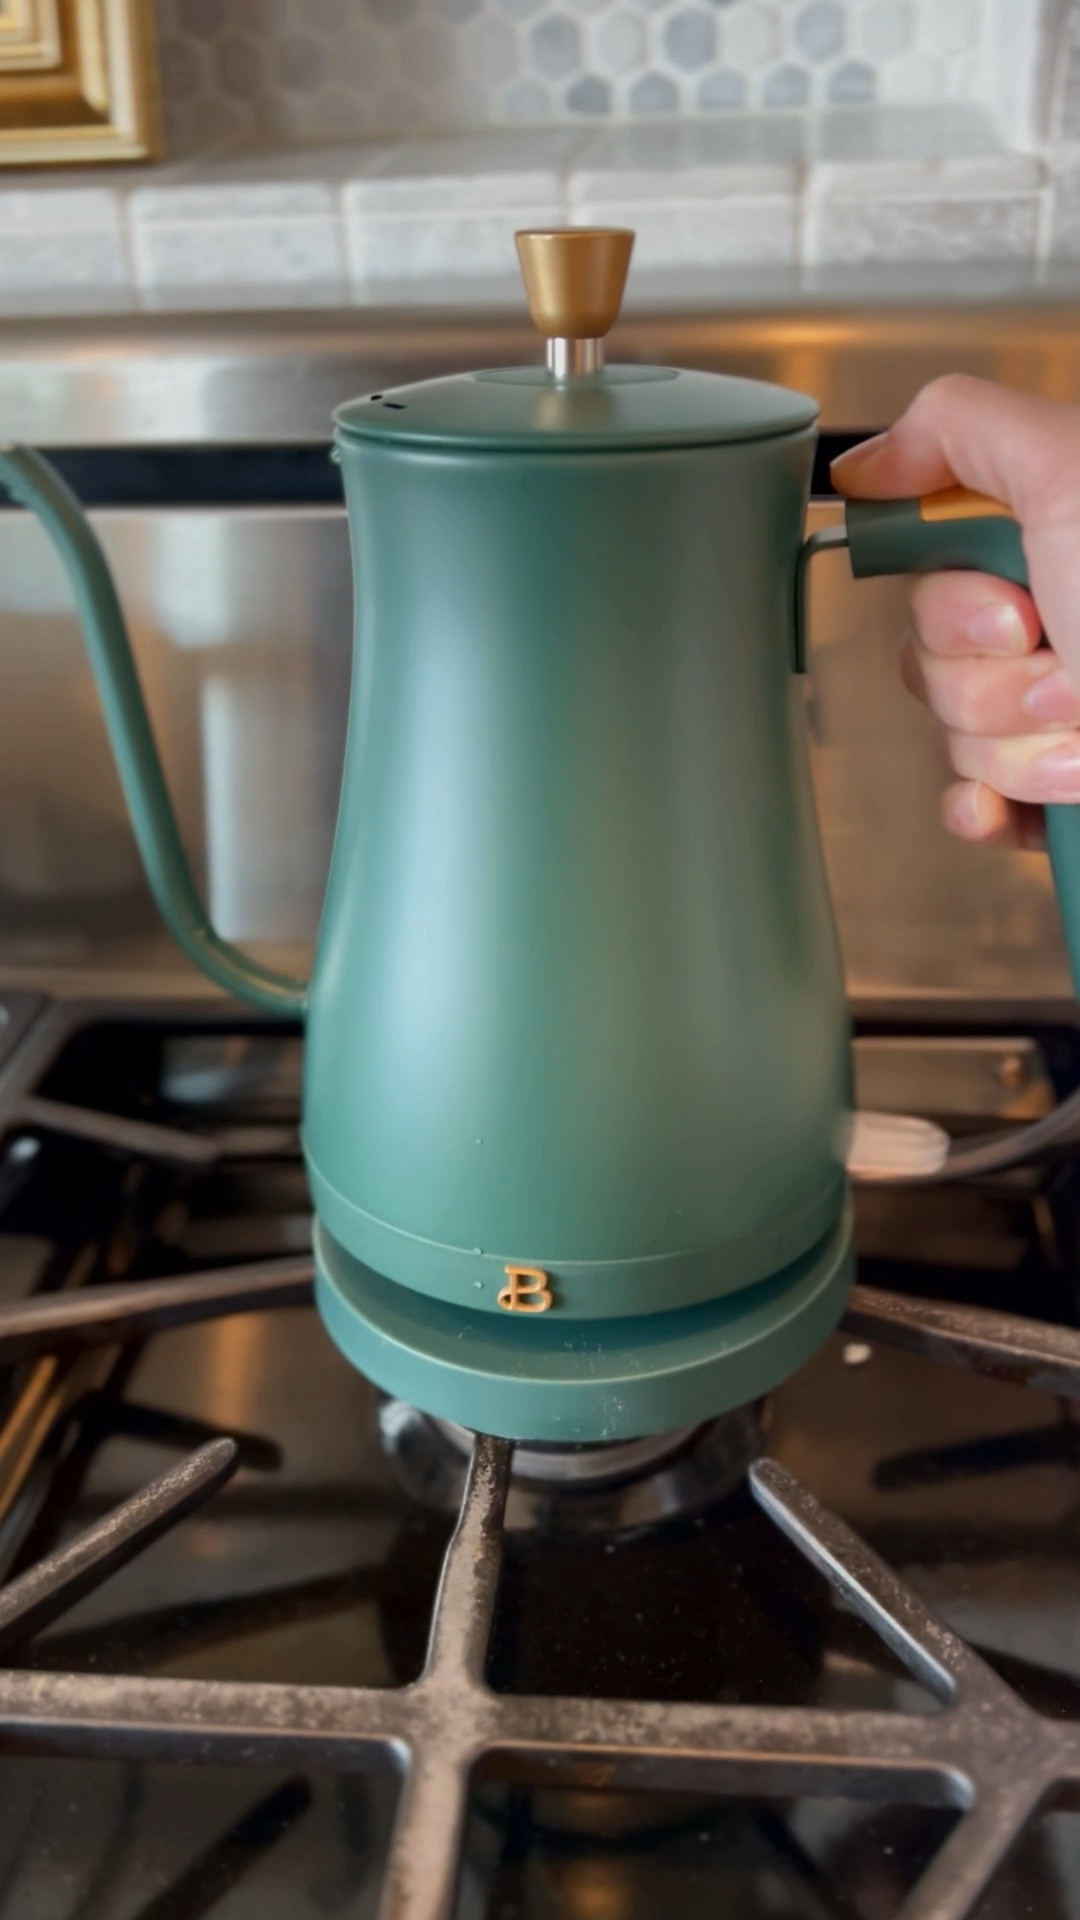 Beautiful 1.7-Liter Electric Kettle 1500 W with One-Touch Activation, Sage  Green by Drew Barrymore - Walmart.com